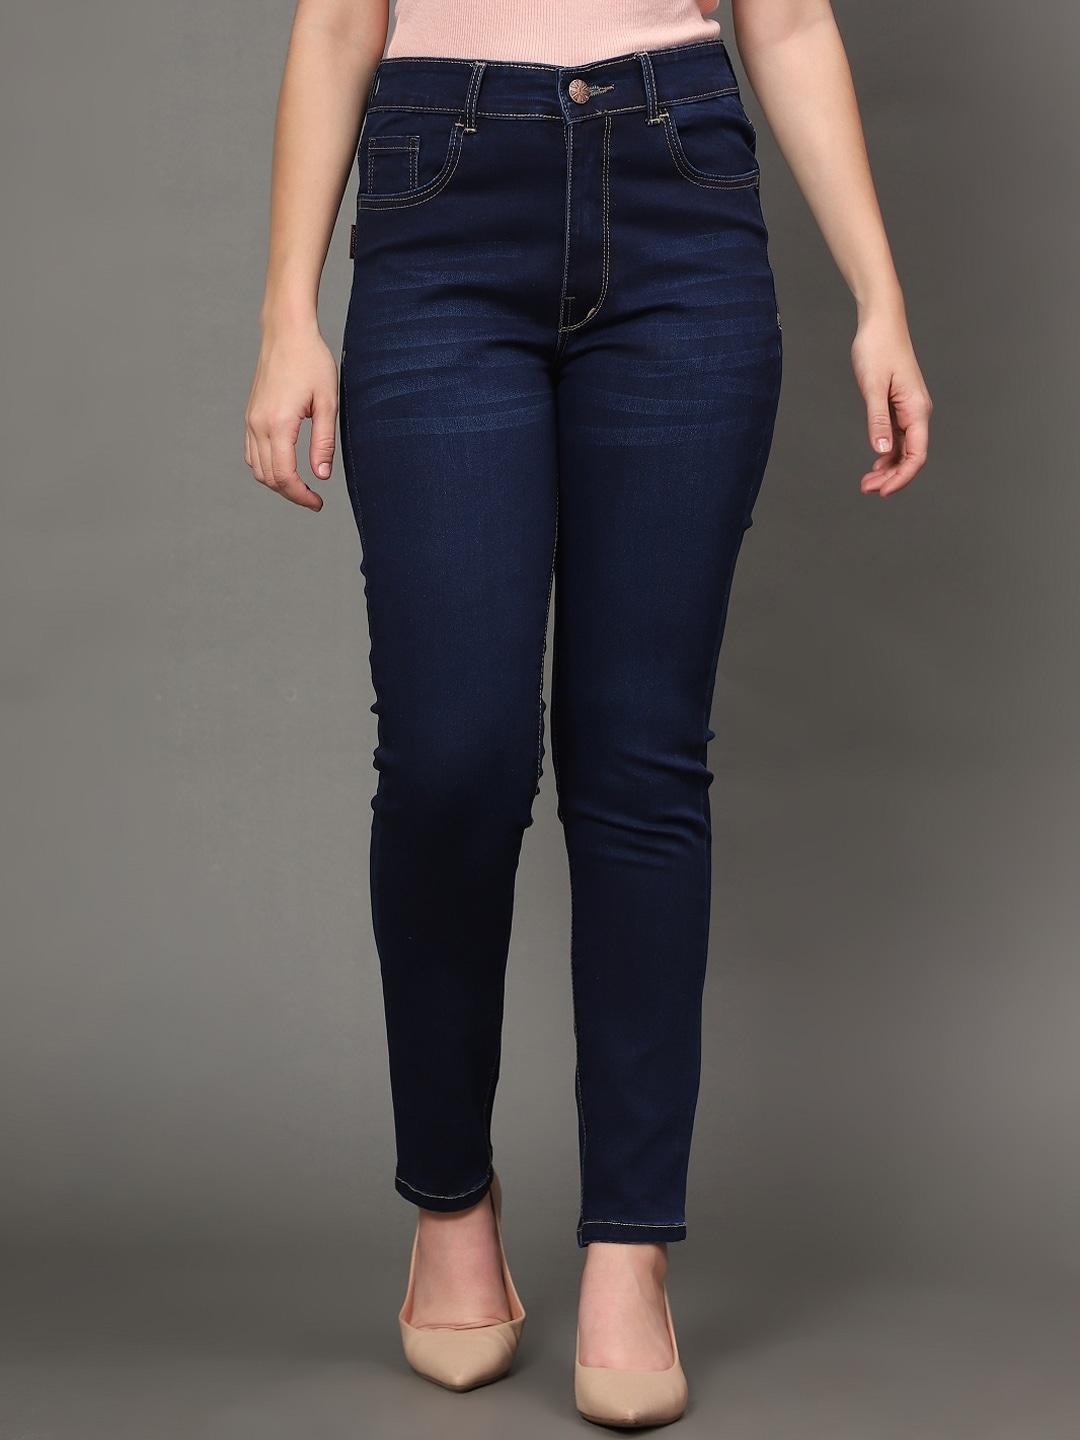 angelfab-women-jean-skinny-fit-high-rise-high-rise-light-fade-cotton-jeans